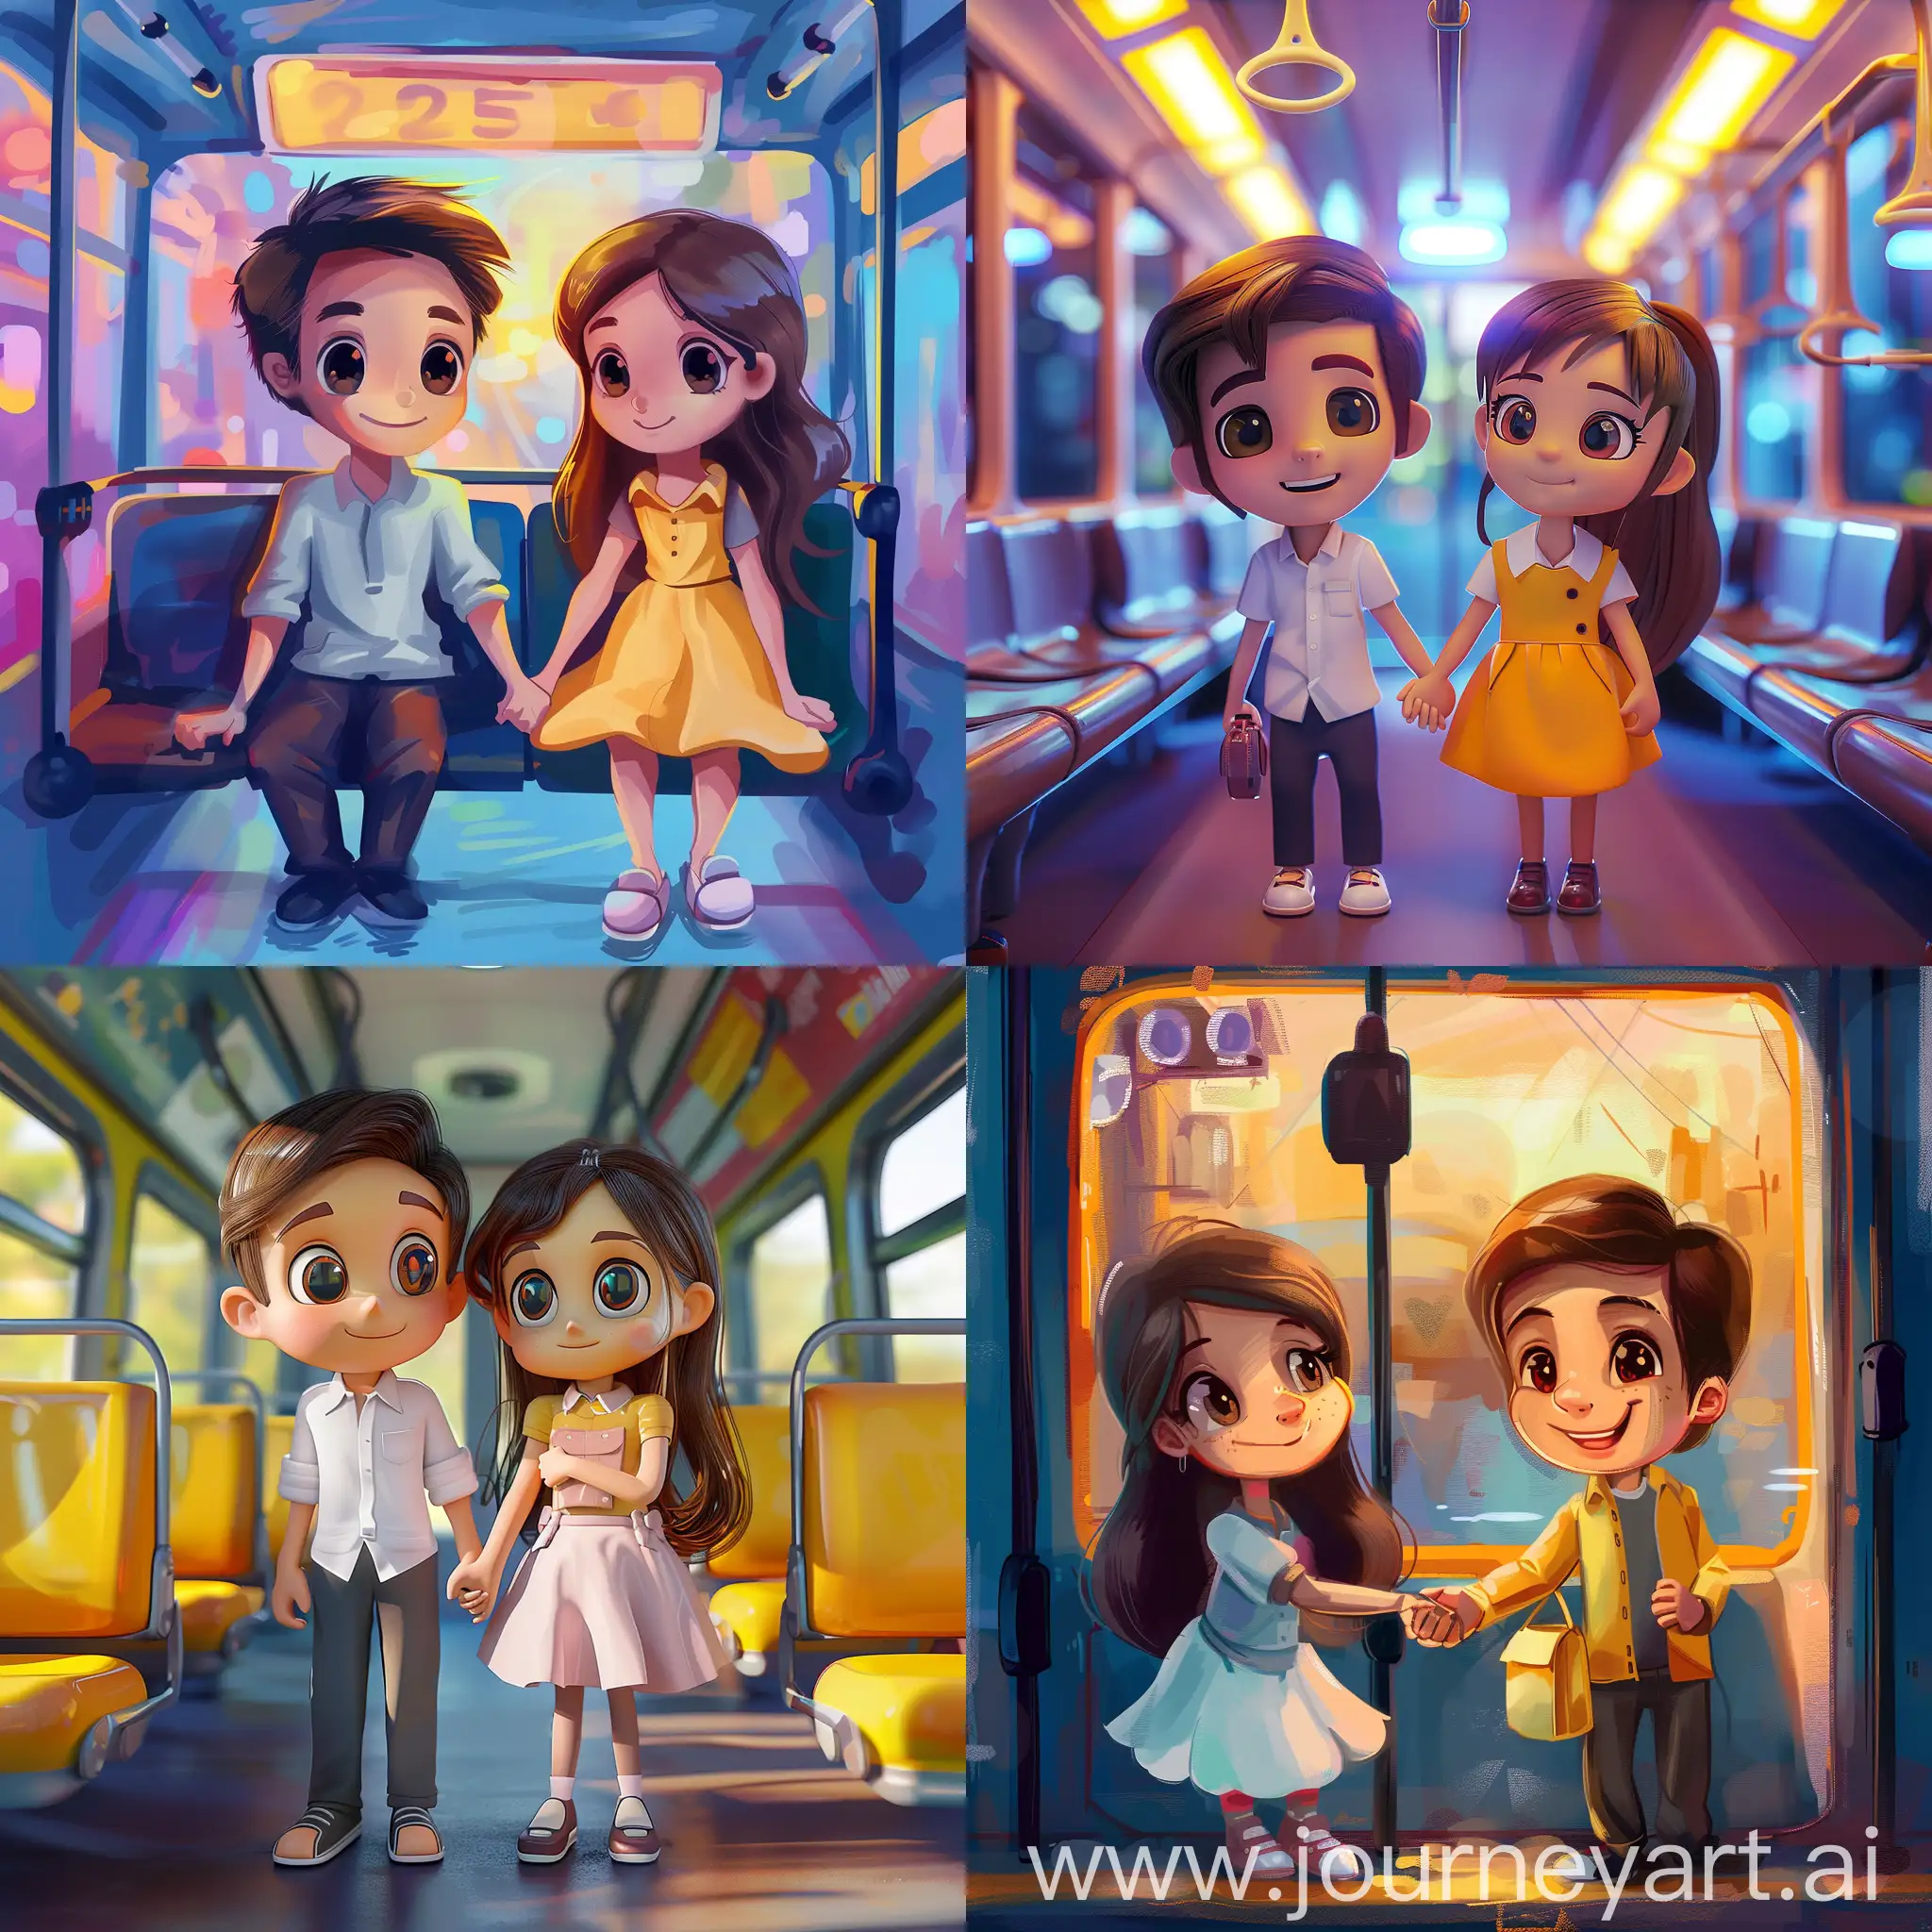 Multicolored-Lovestruck-Characters-Holding-Hands-on-Bus-Journey